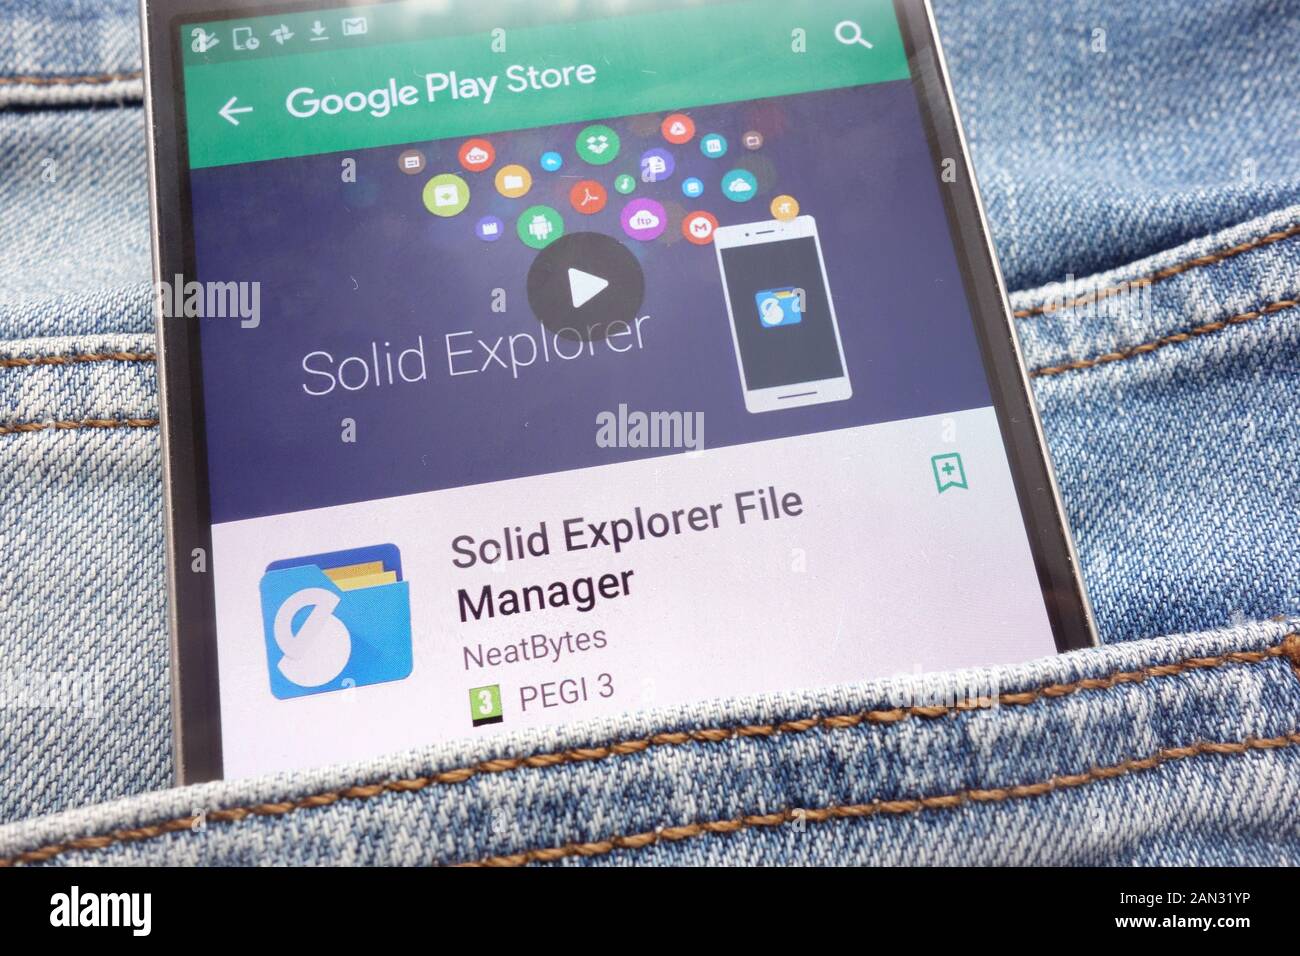 Solid Explorer File Manager app on Google Play Store website displayed on smartphone hidden in jeans pocket Stock Photo